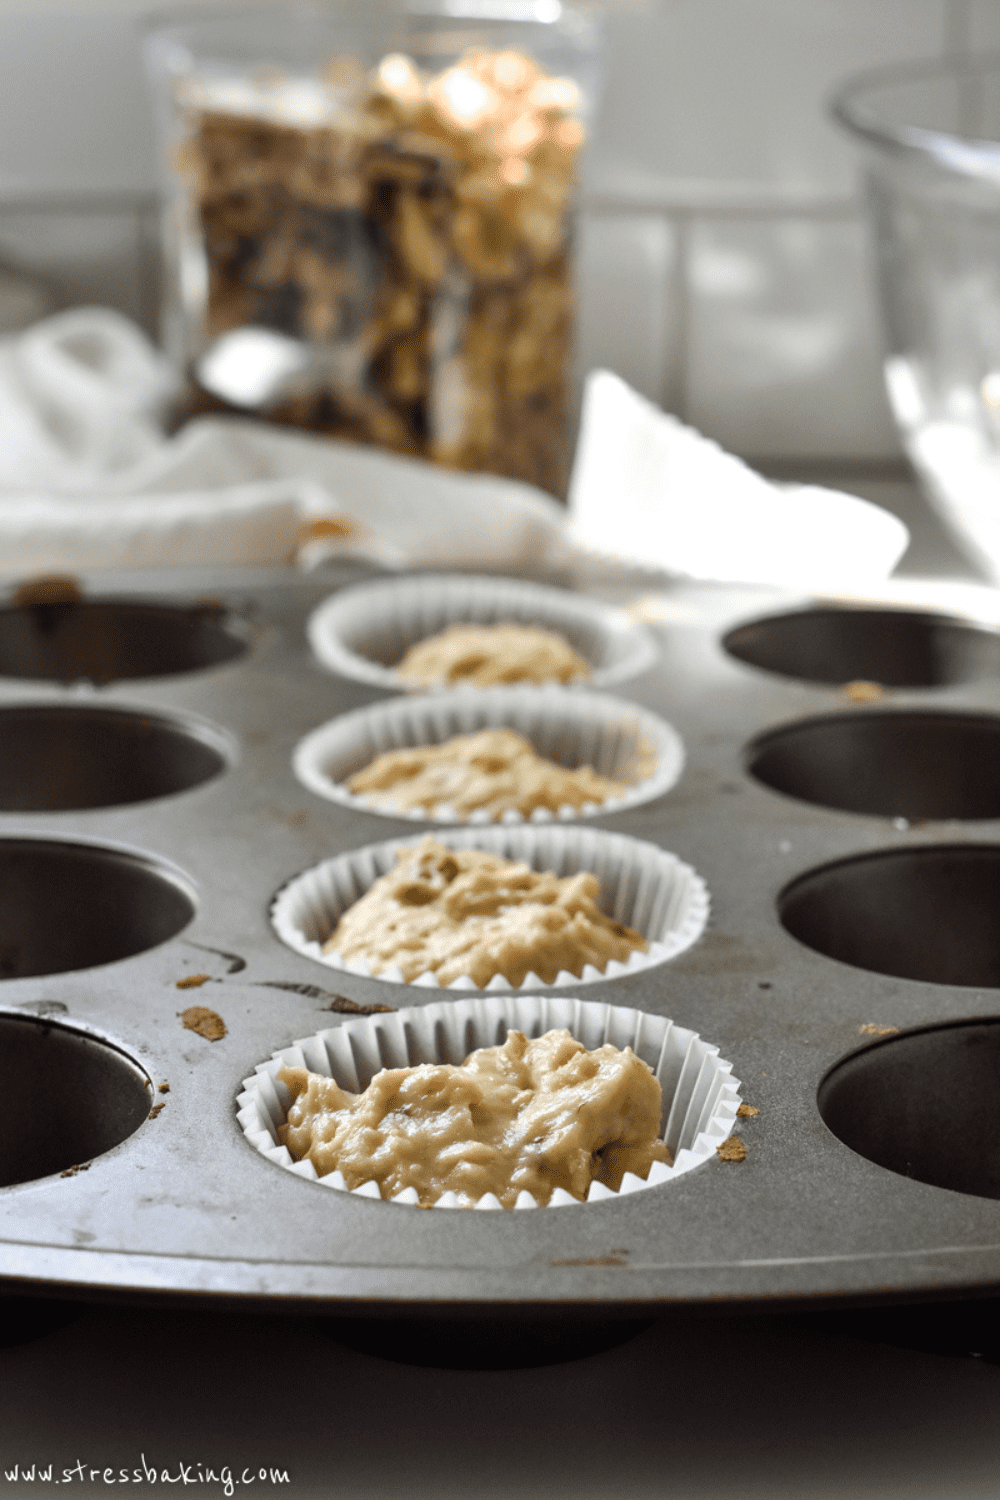 Muffin batter in white liners inside a muffin pan